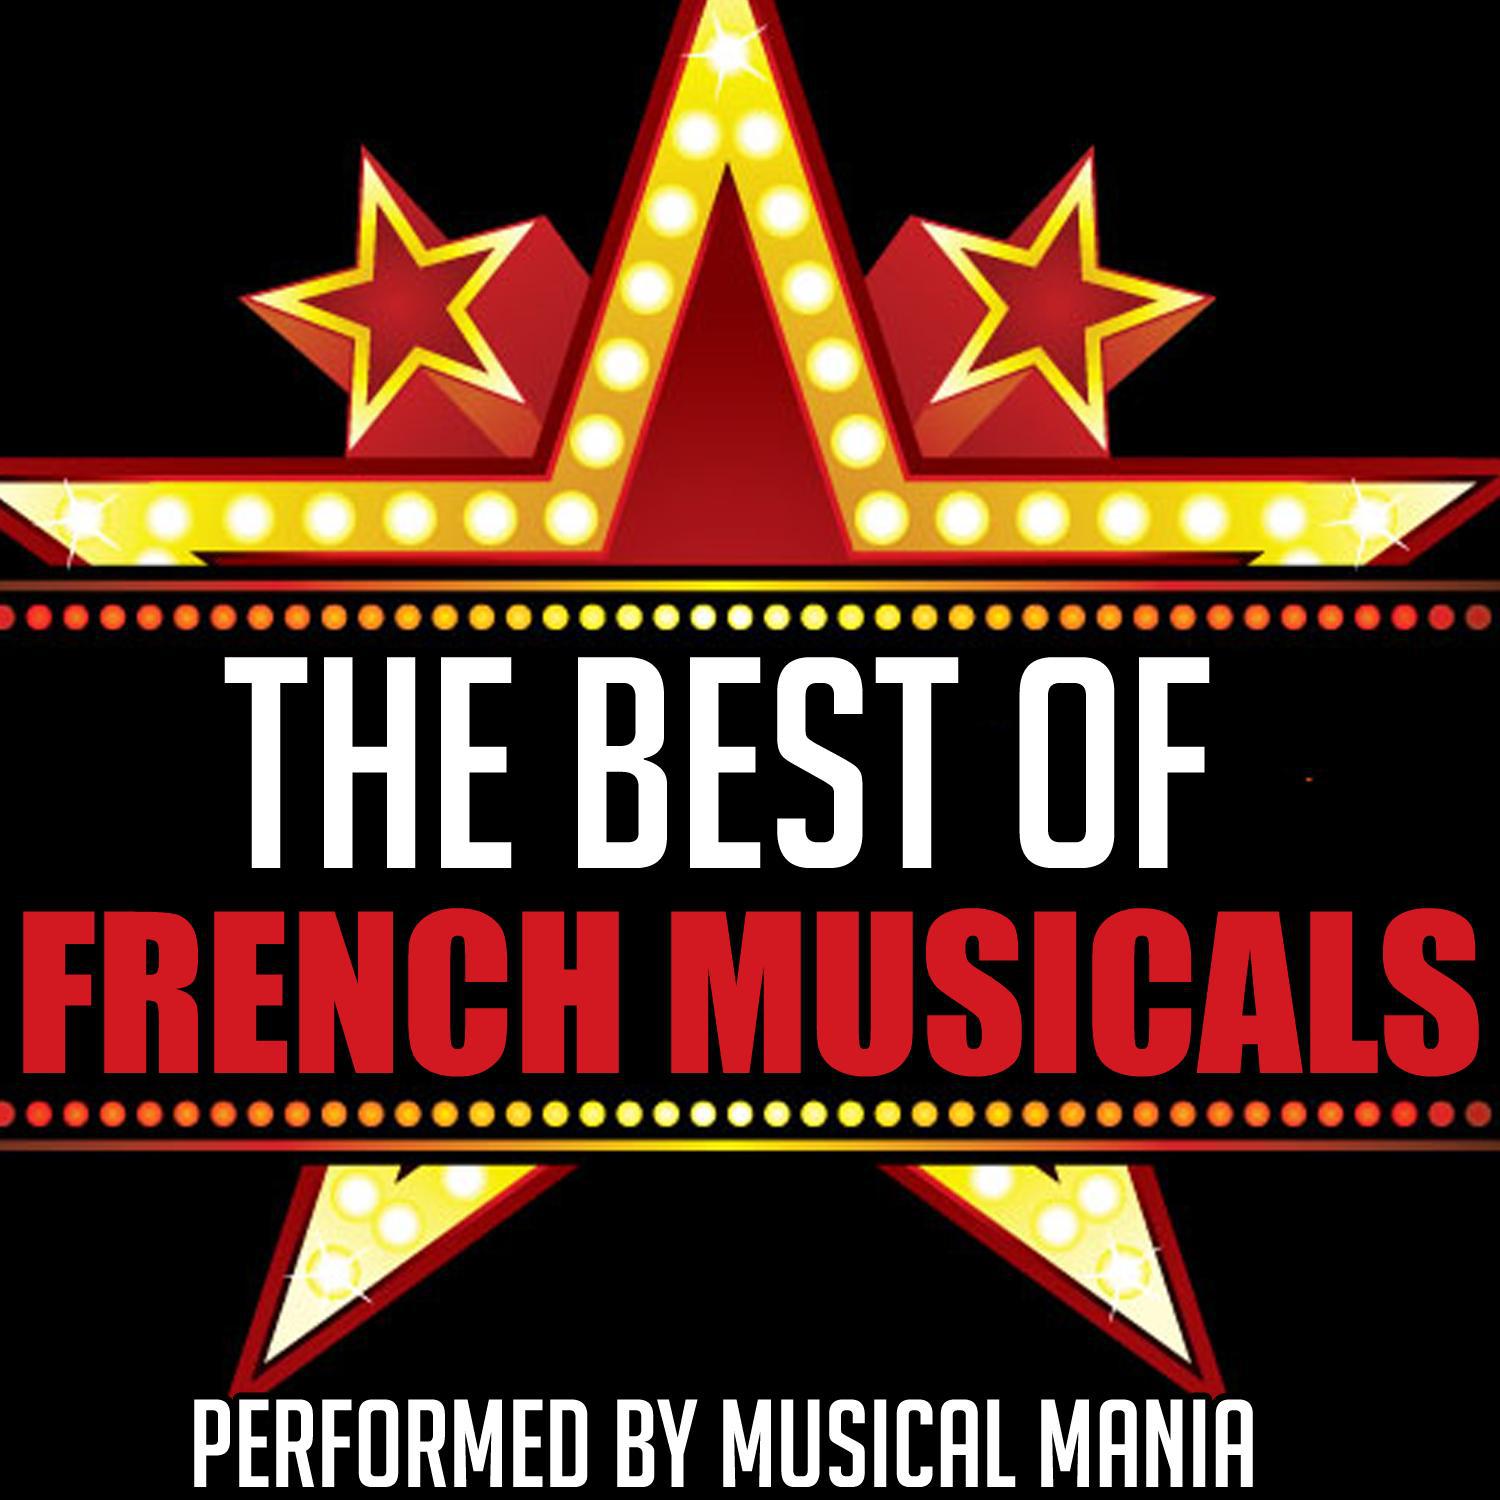 The Best of French Musicals